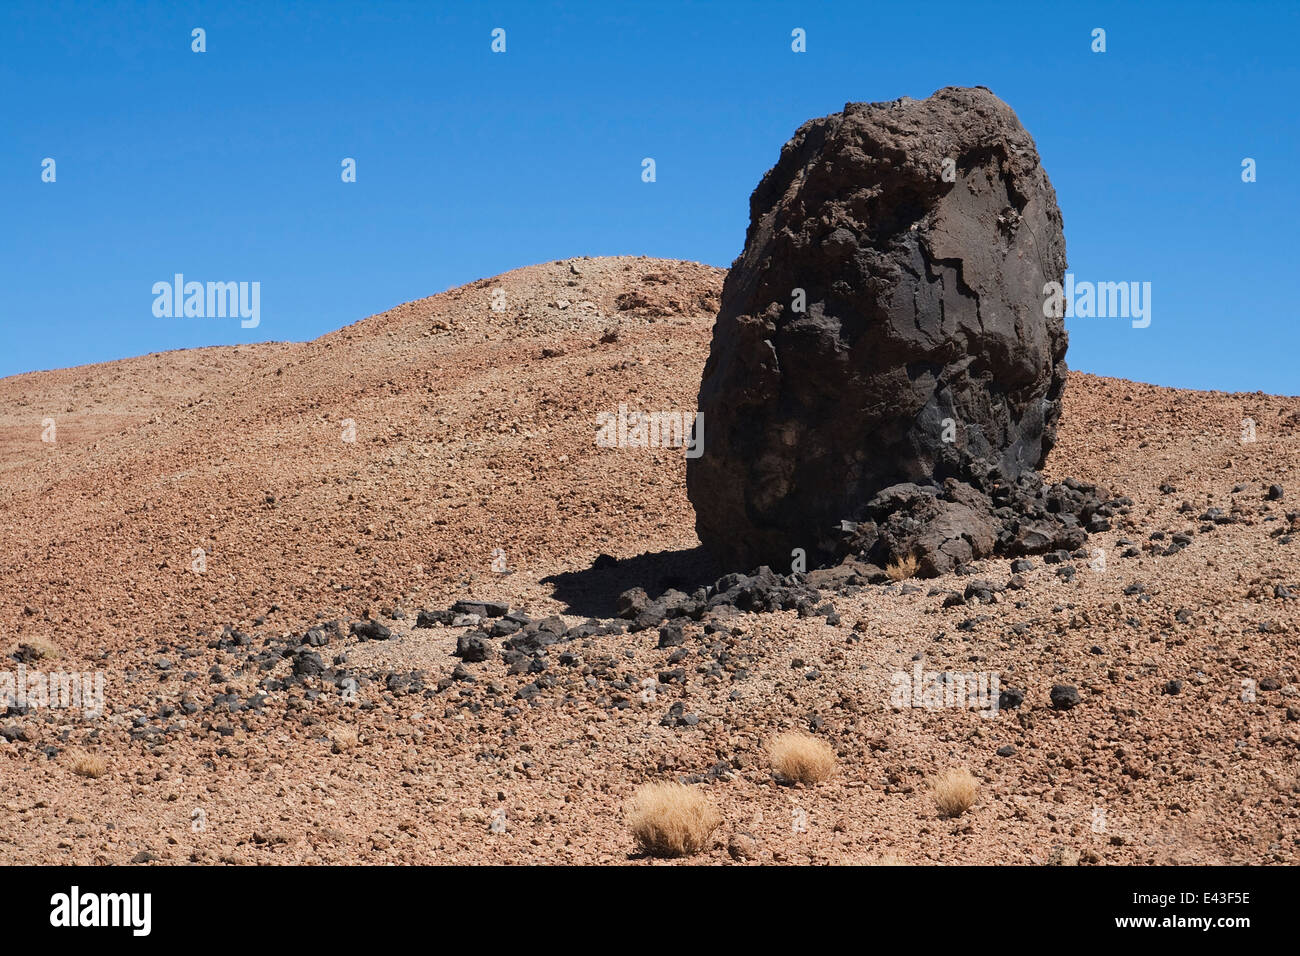 Egg of El Teide, accretion ball formed of solidified lava, on the slopes of Mount Teide, Tenerife, Canary Islands. Stock Photo